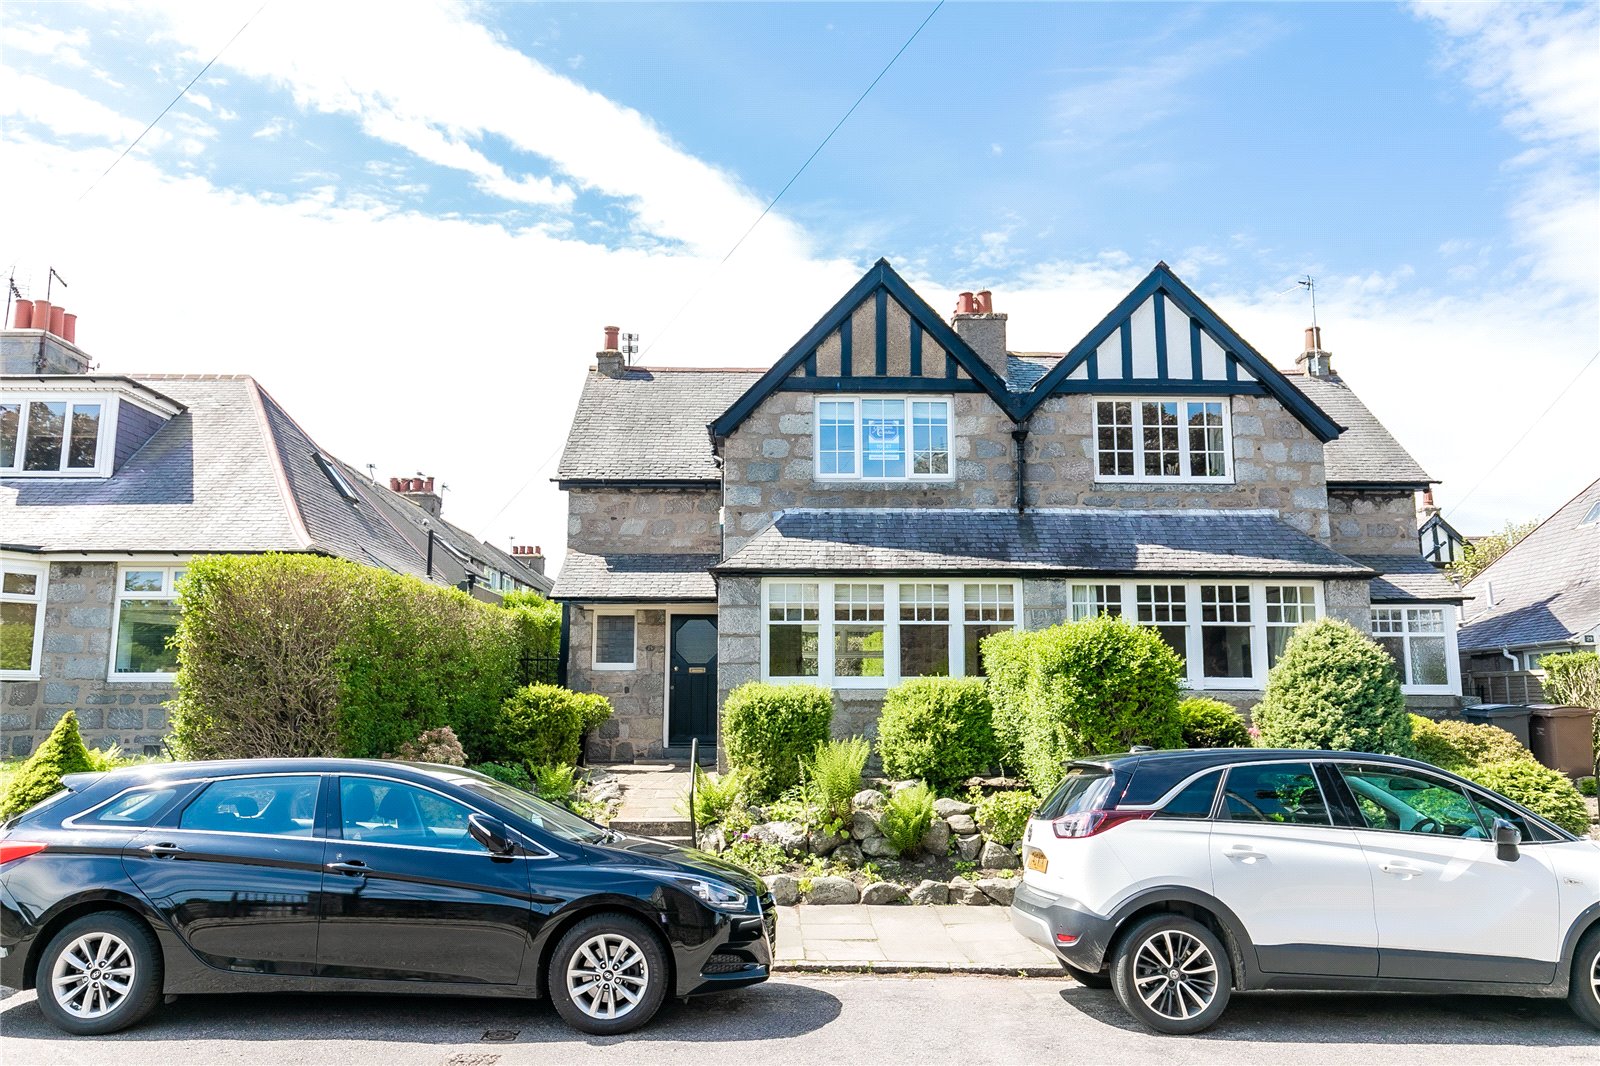 Our latest properties for sale or to let (22nd March 2023)